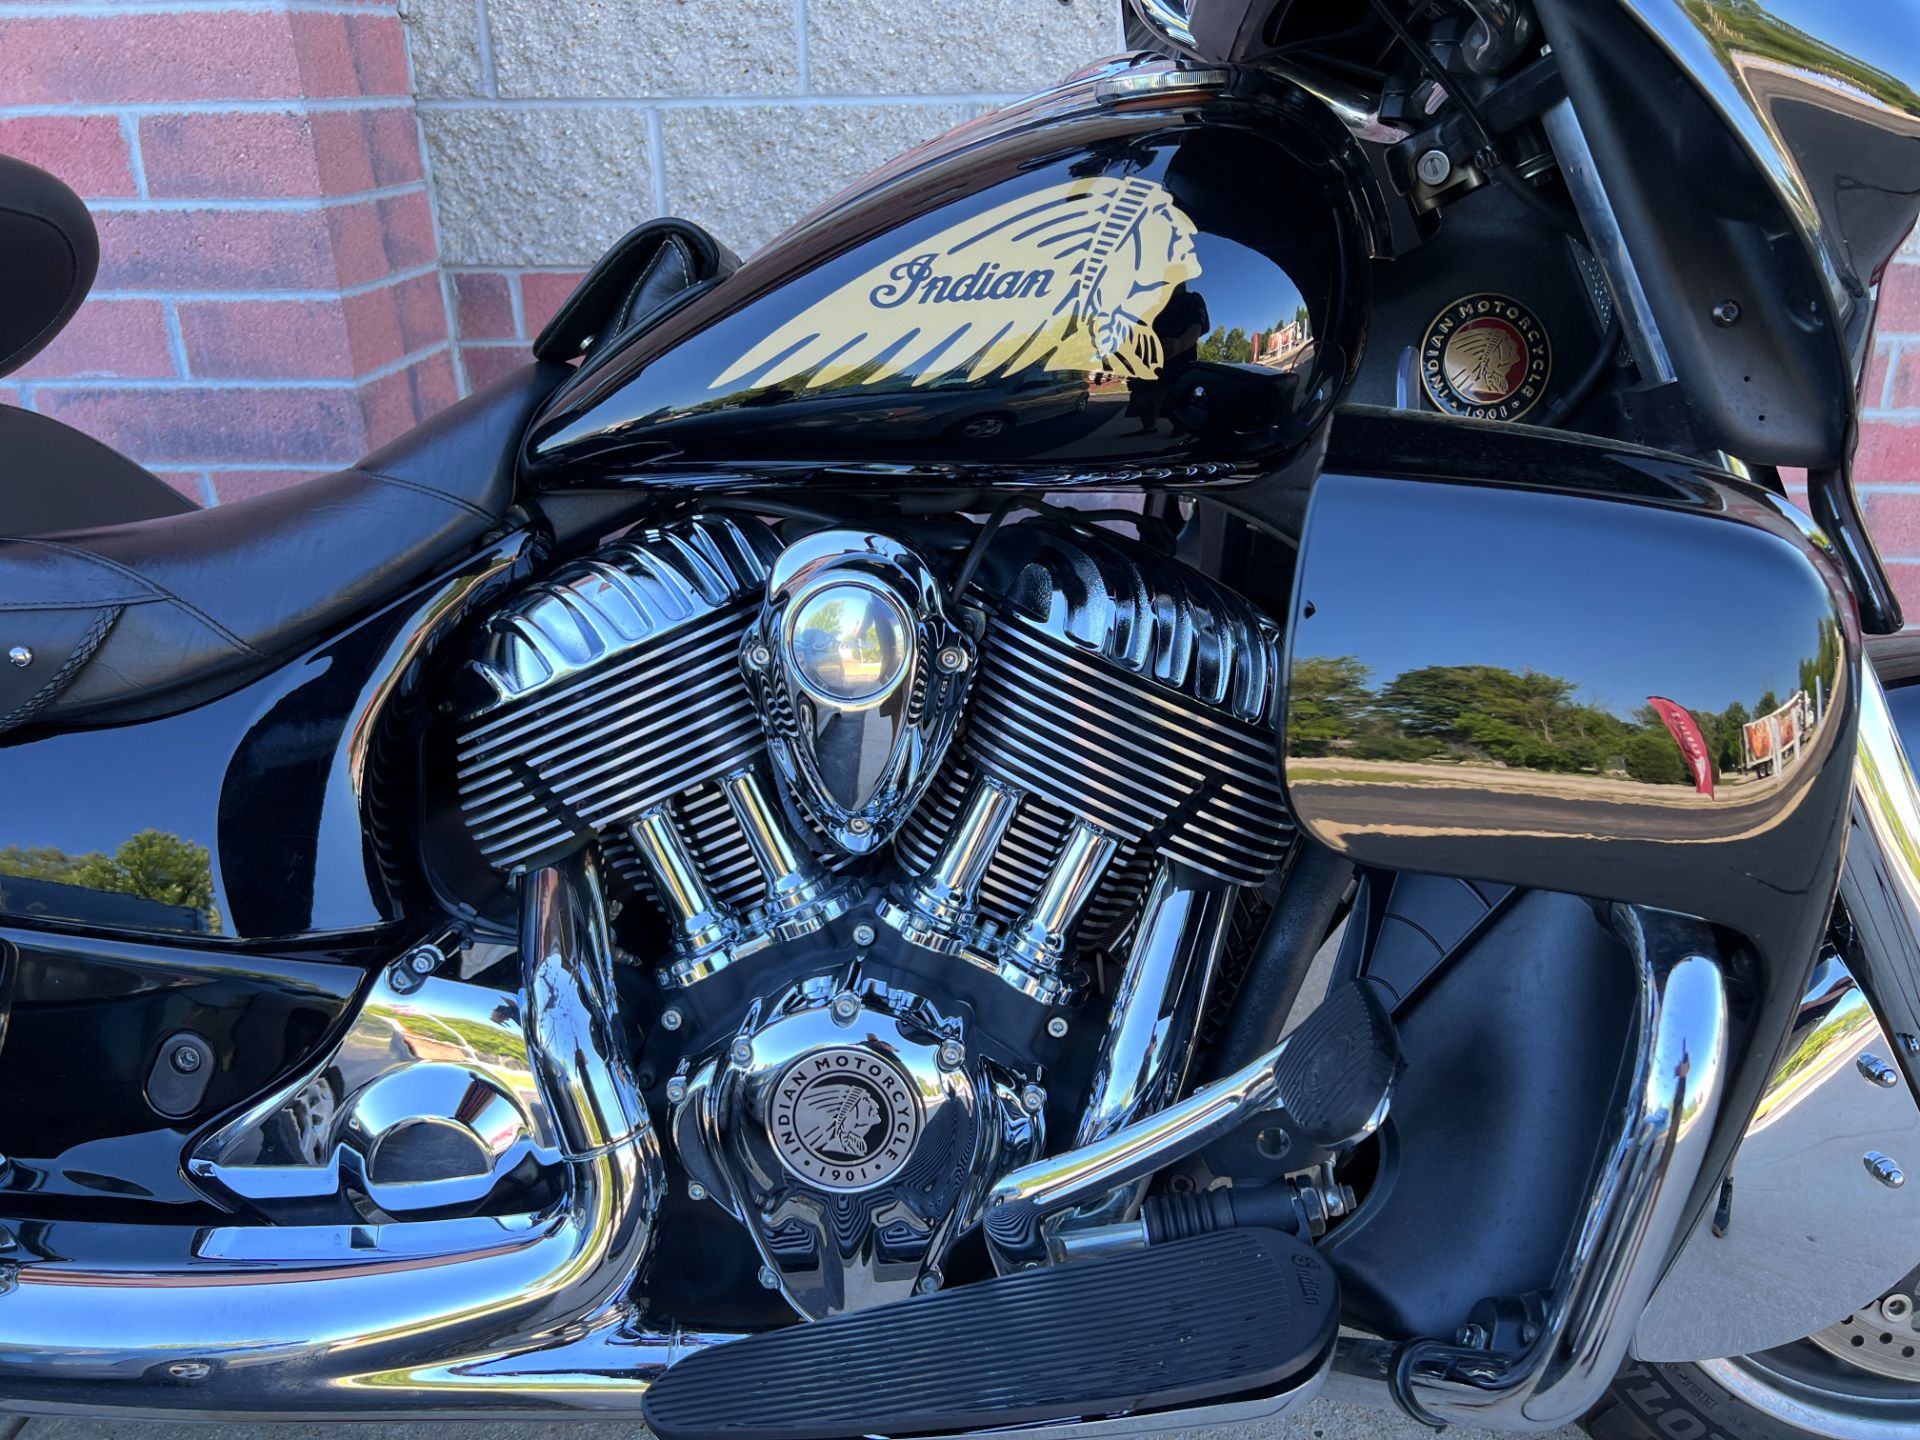 2016 Indian Chieftain® in Muskego, Wisconsin - Photo 5